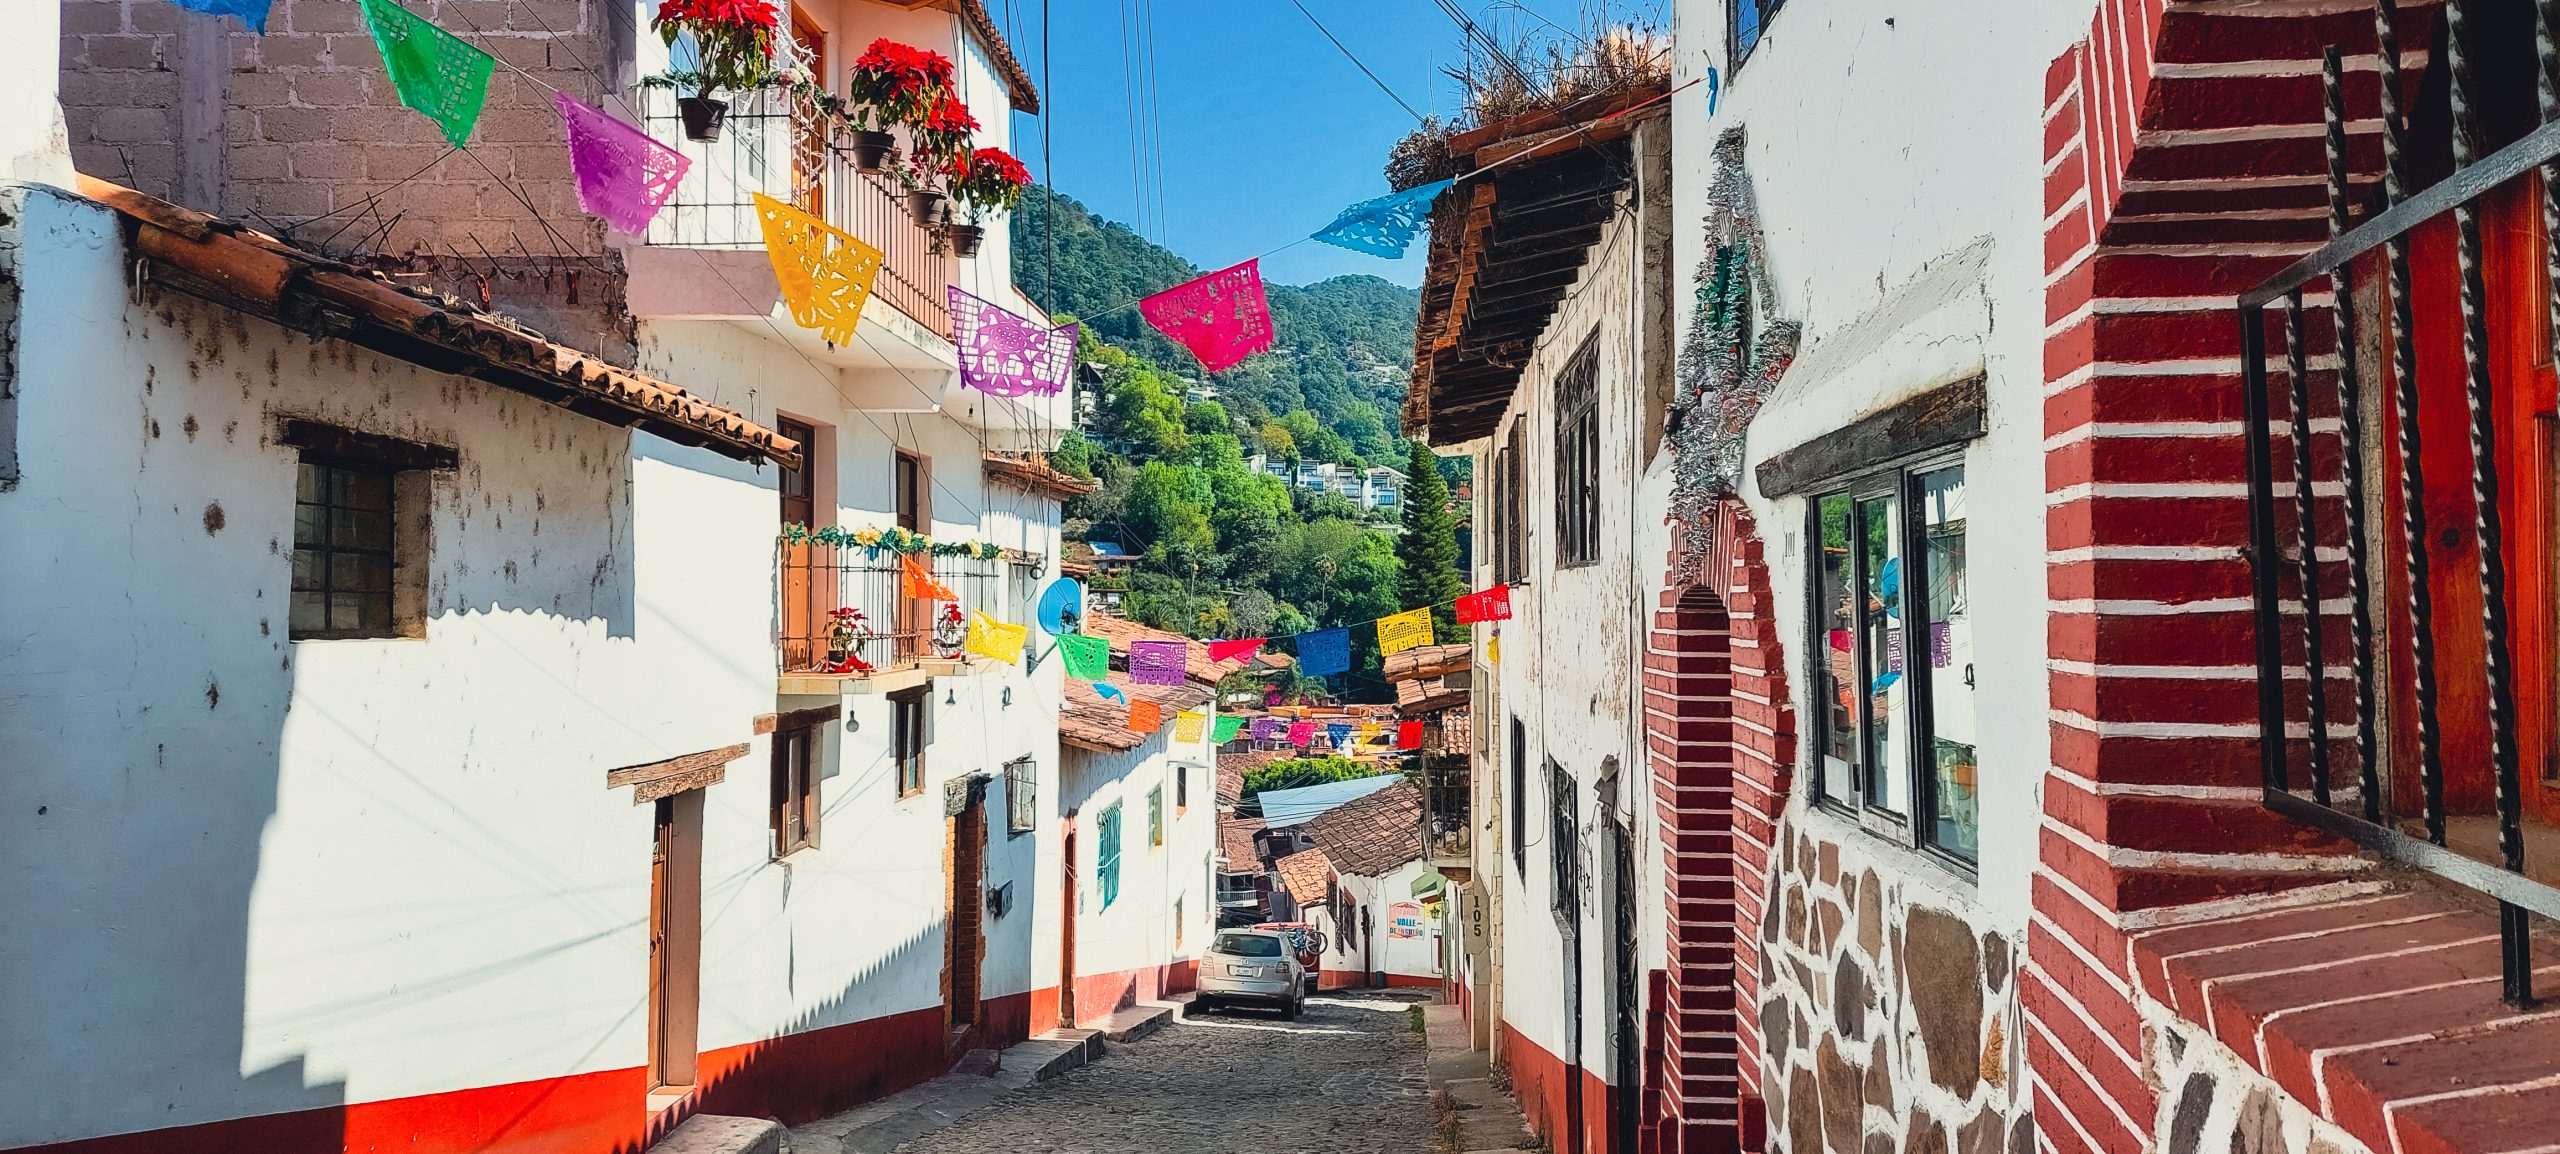 13 Best Things to do in Valle de Bravo, Mexico • Owl Over The World